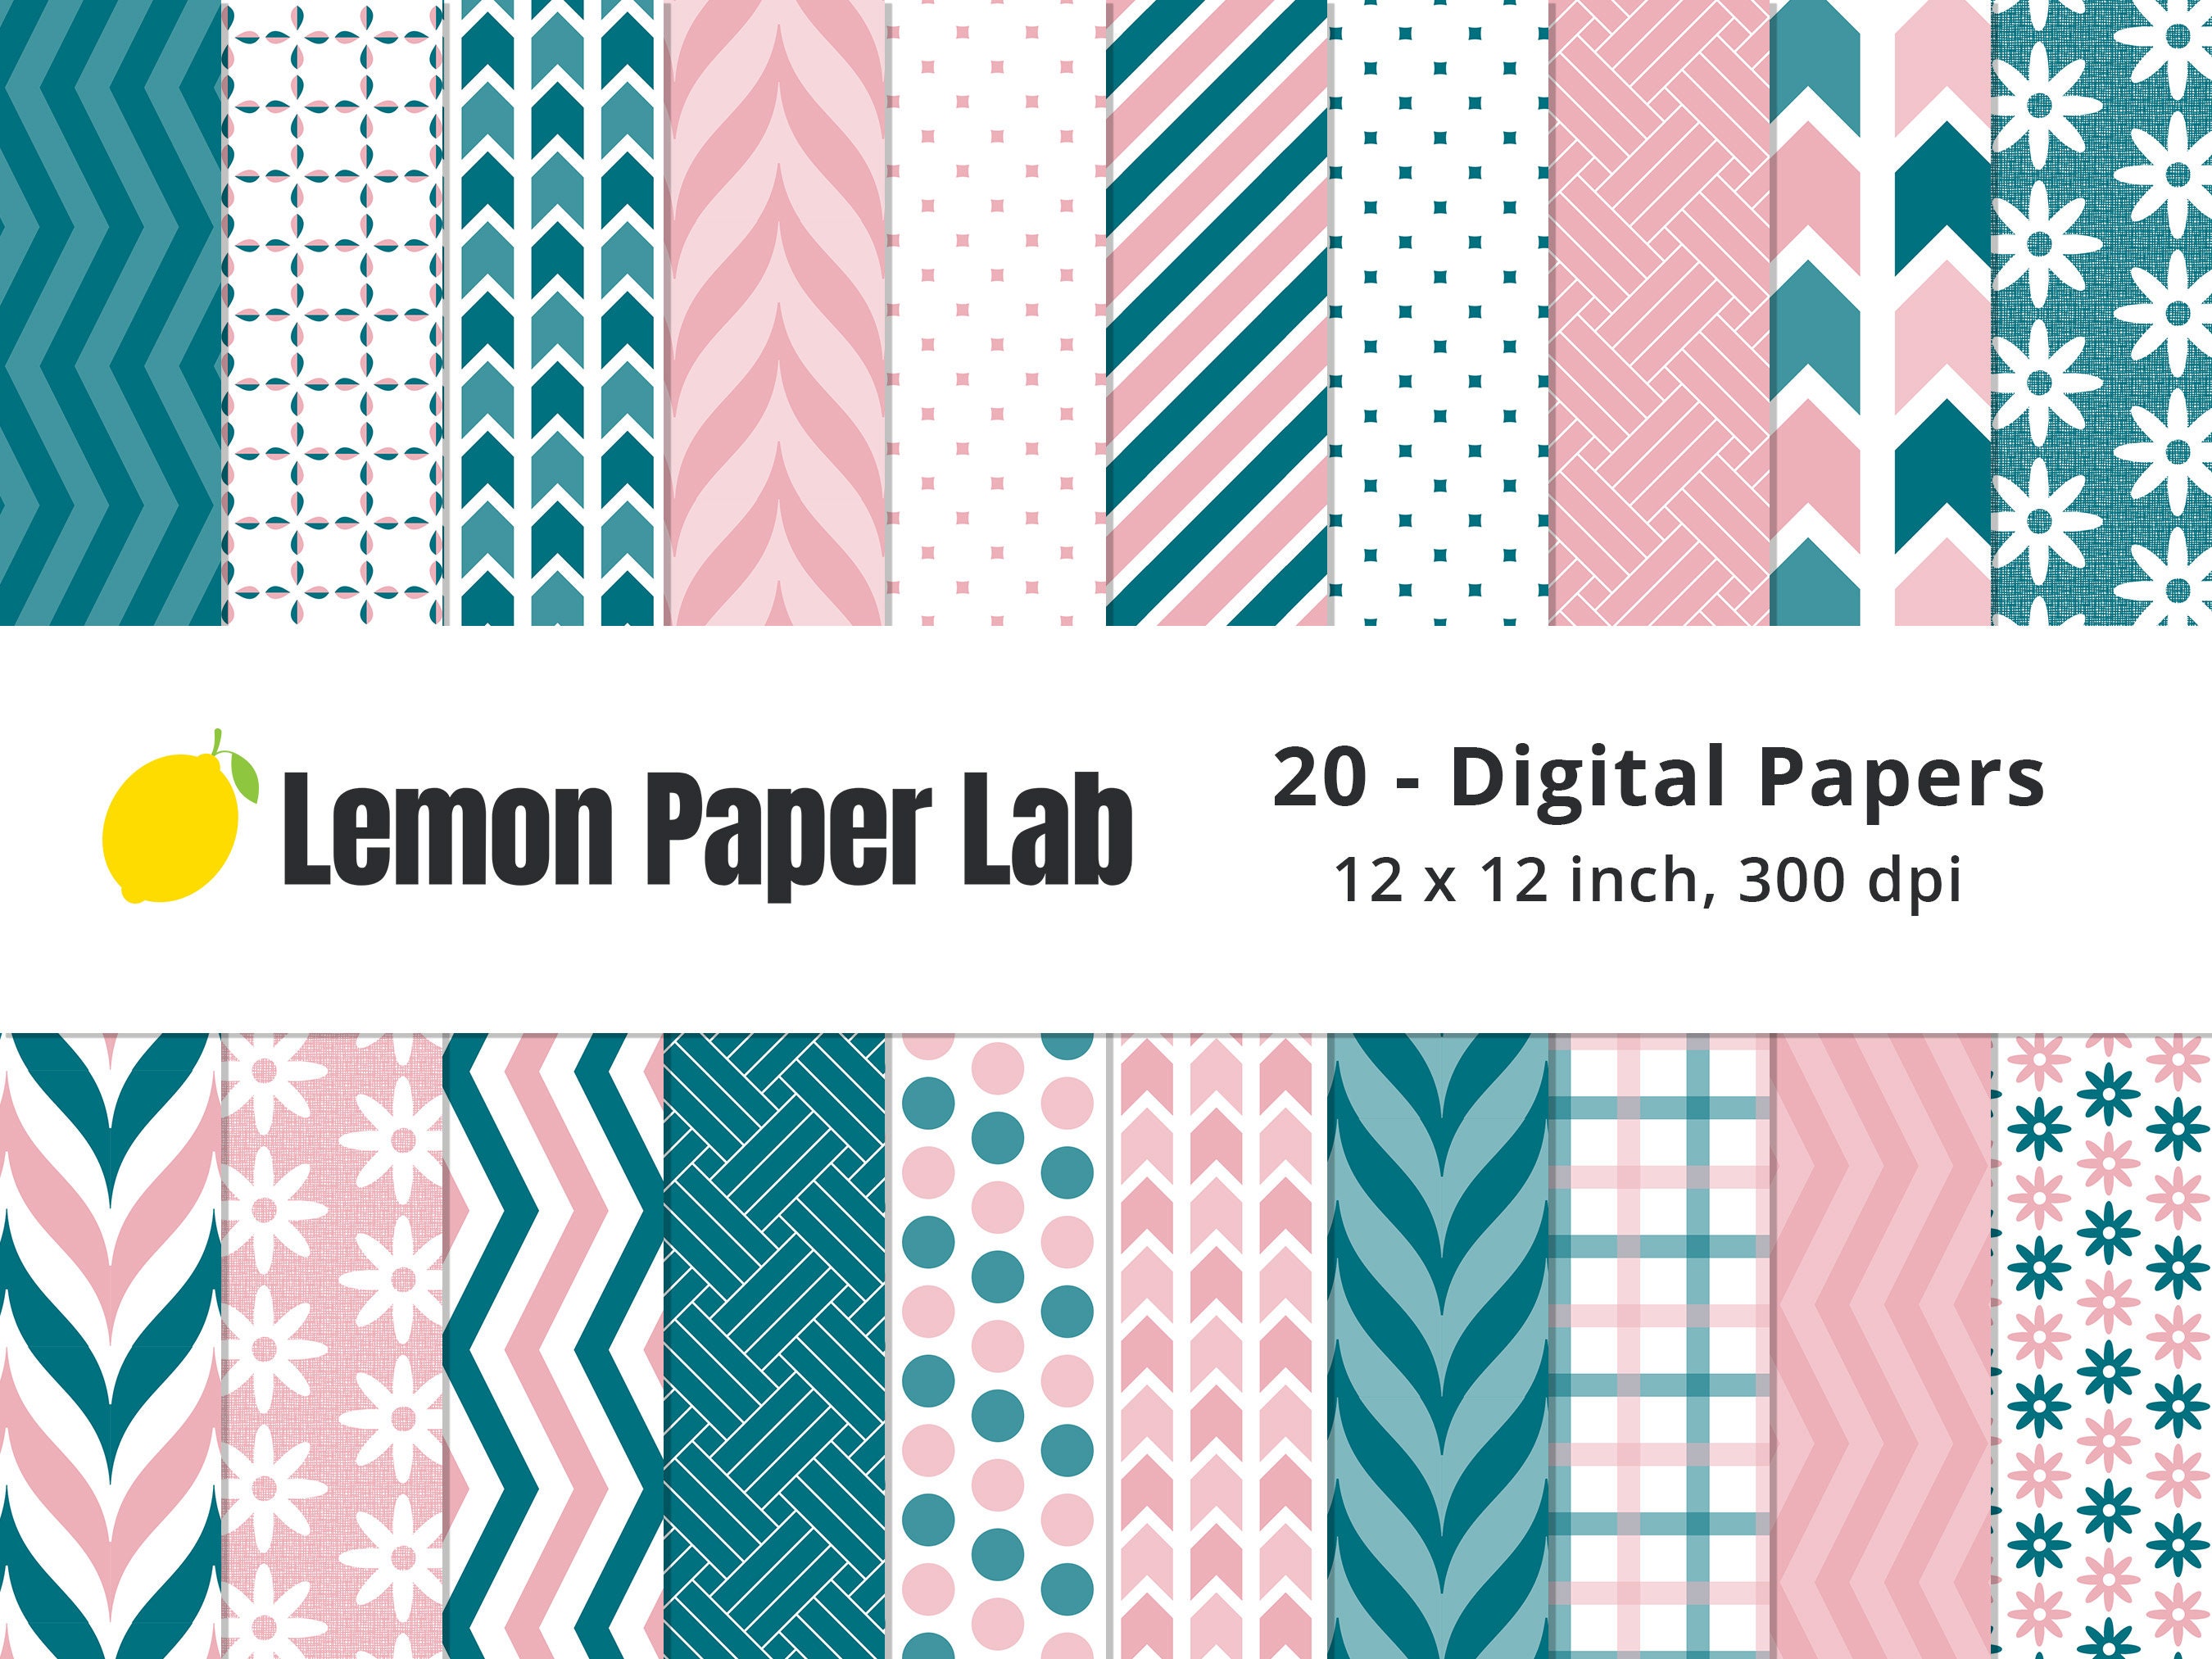 Light Pink and White Scrapbook Papers Graphic by Lemon Paper Lab